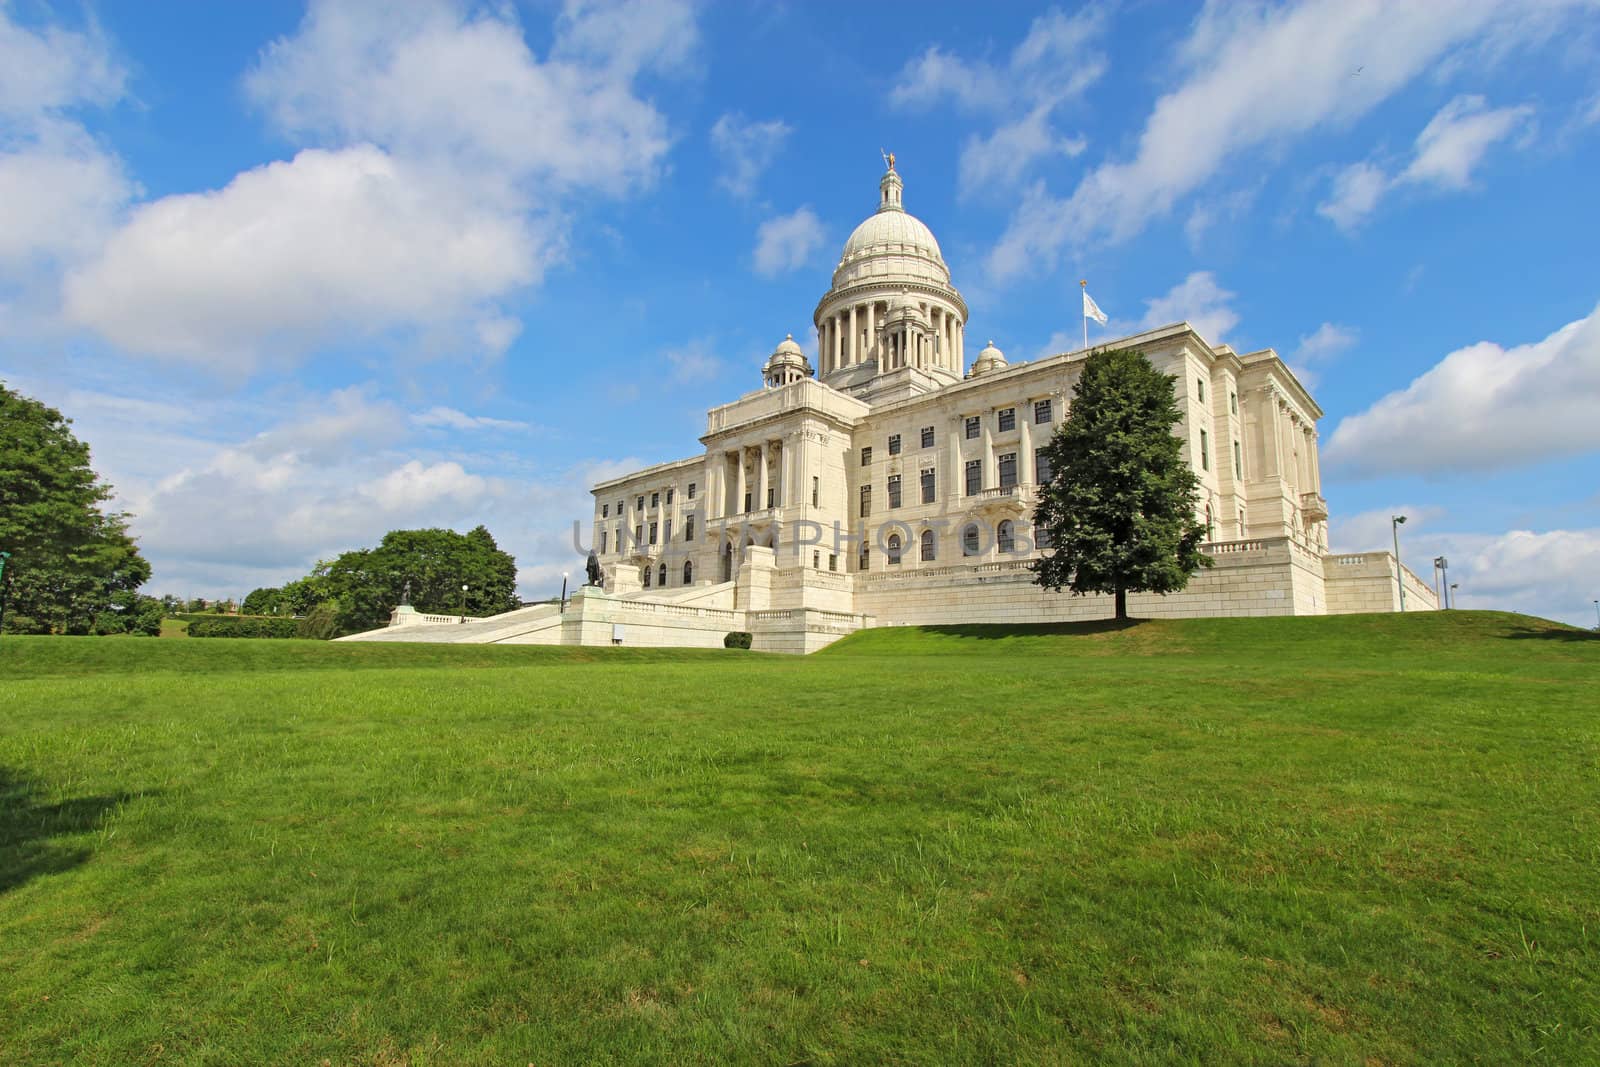 Wide-angle view of the front of the Rhode Island state capitol building as it sits on Capitol Hill in Providence with bright blue sky and white clouds in the background. The building is covered with white Georgia marble and was constructed from 1895 to 1904.